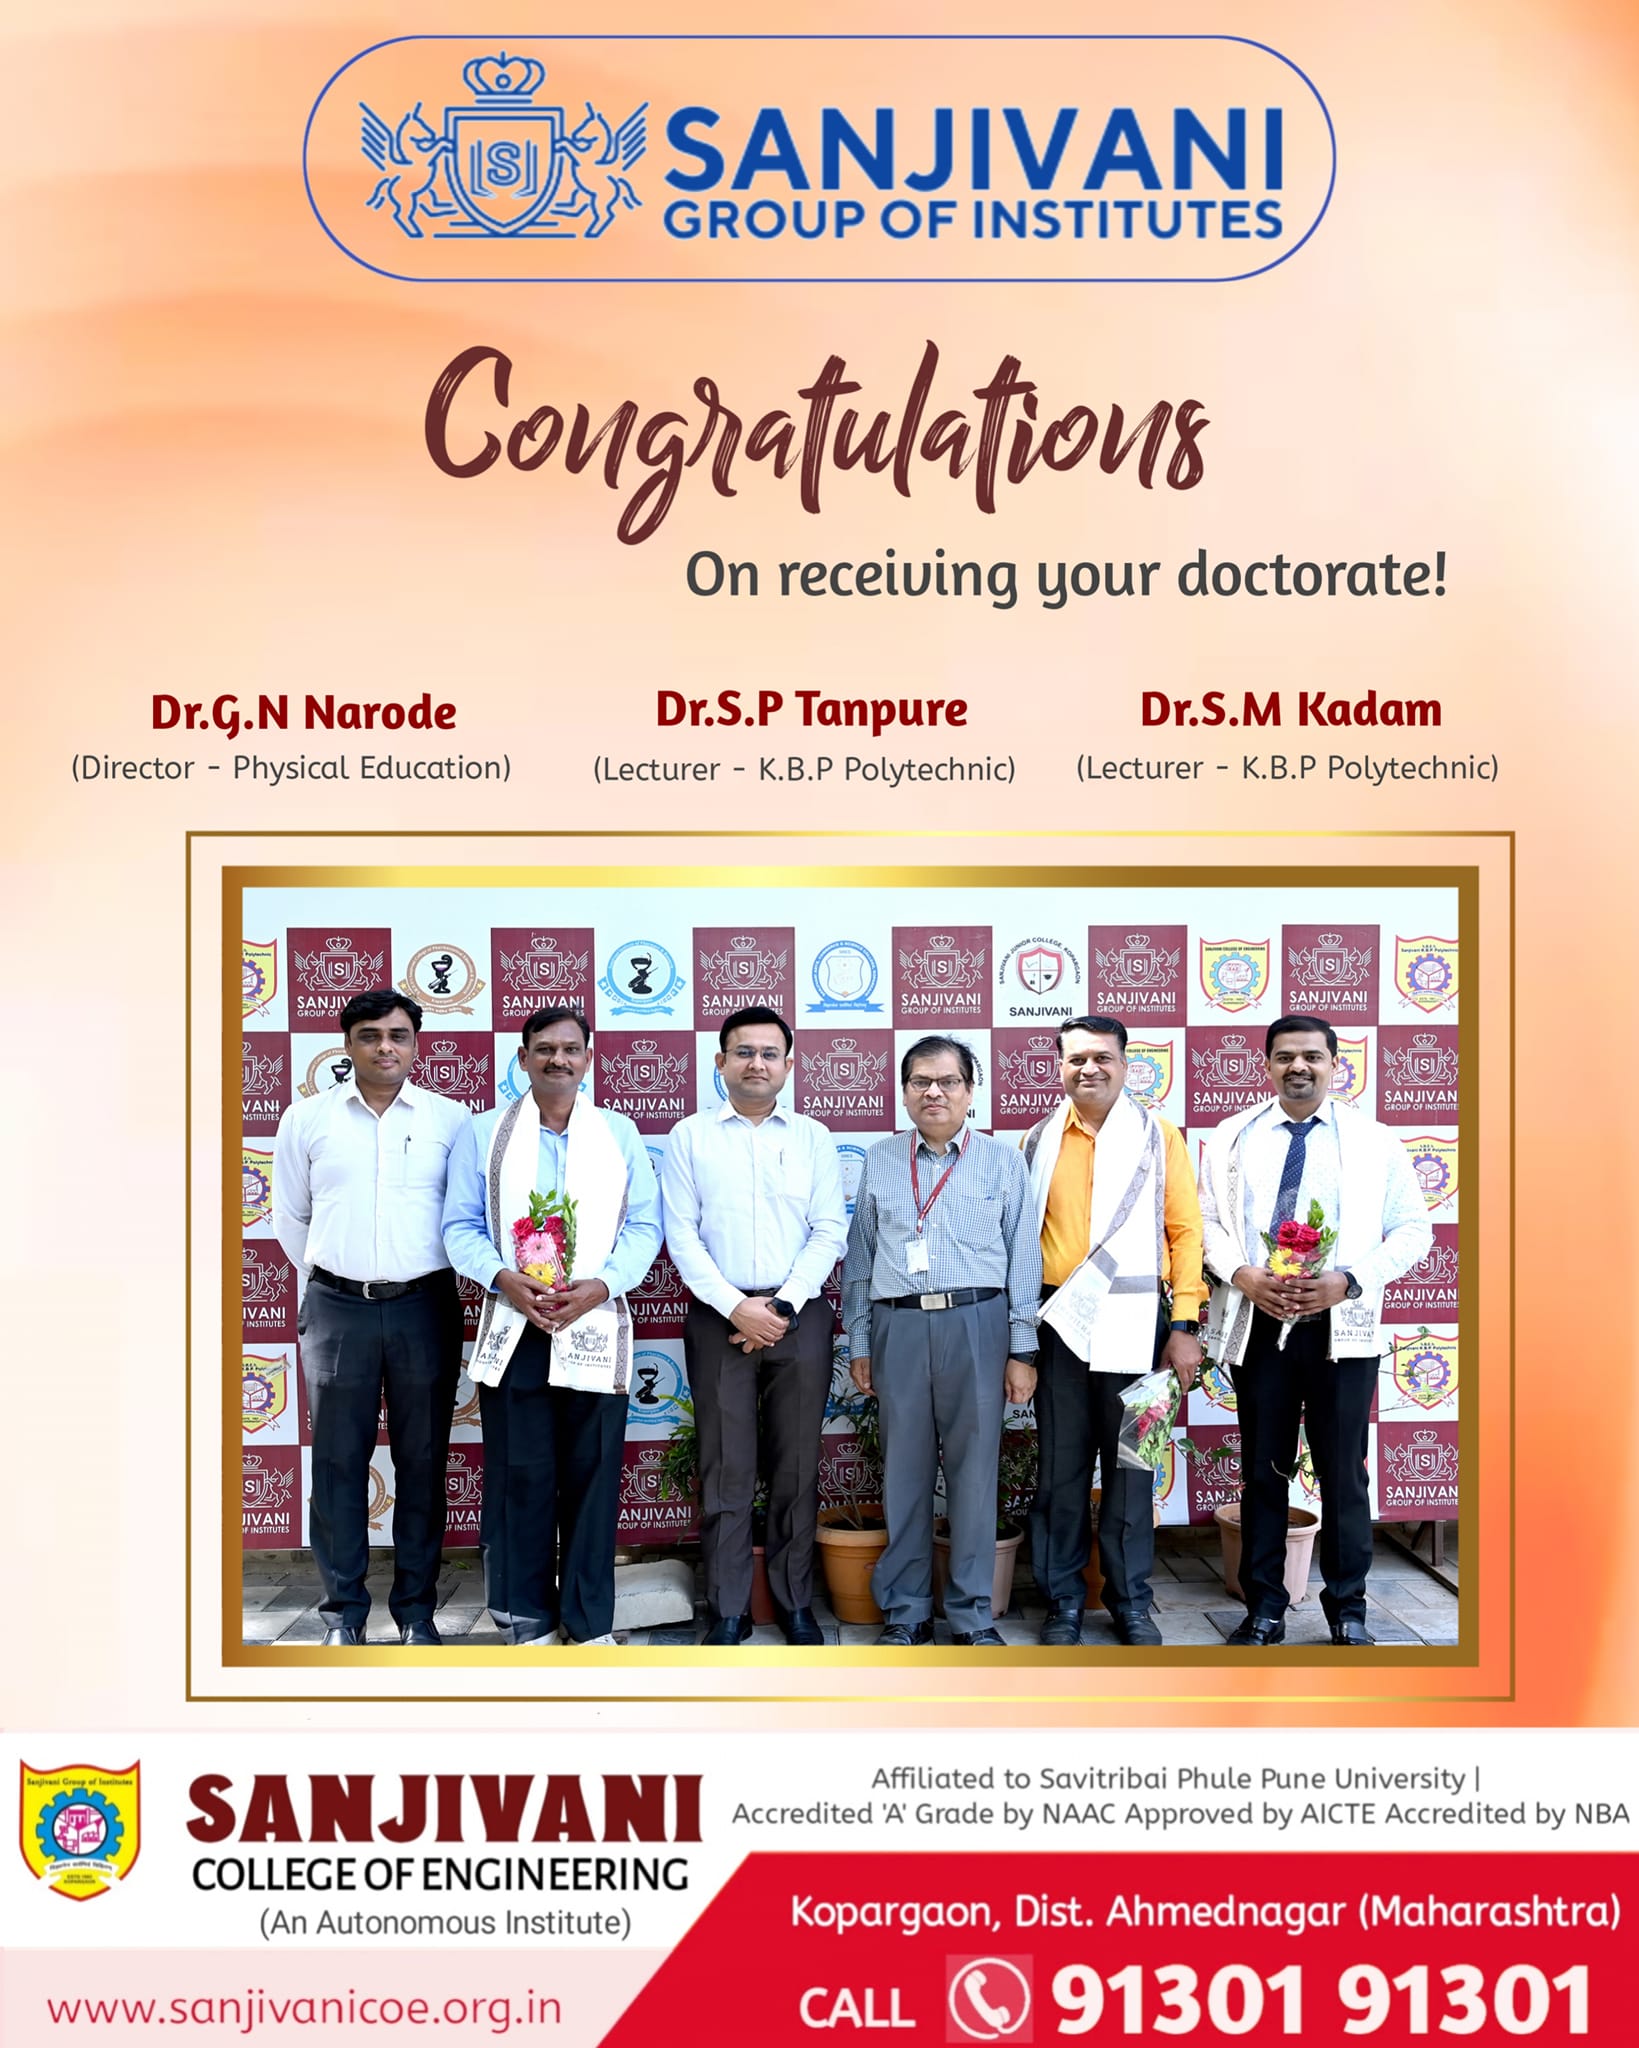 Happy to share that two of our staff ,Dr.S.M Kadam(Mechatronics Dept),Dr.S.P.Tanpure(Mechanical Dept) have completed their PHD recently